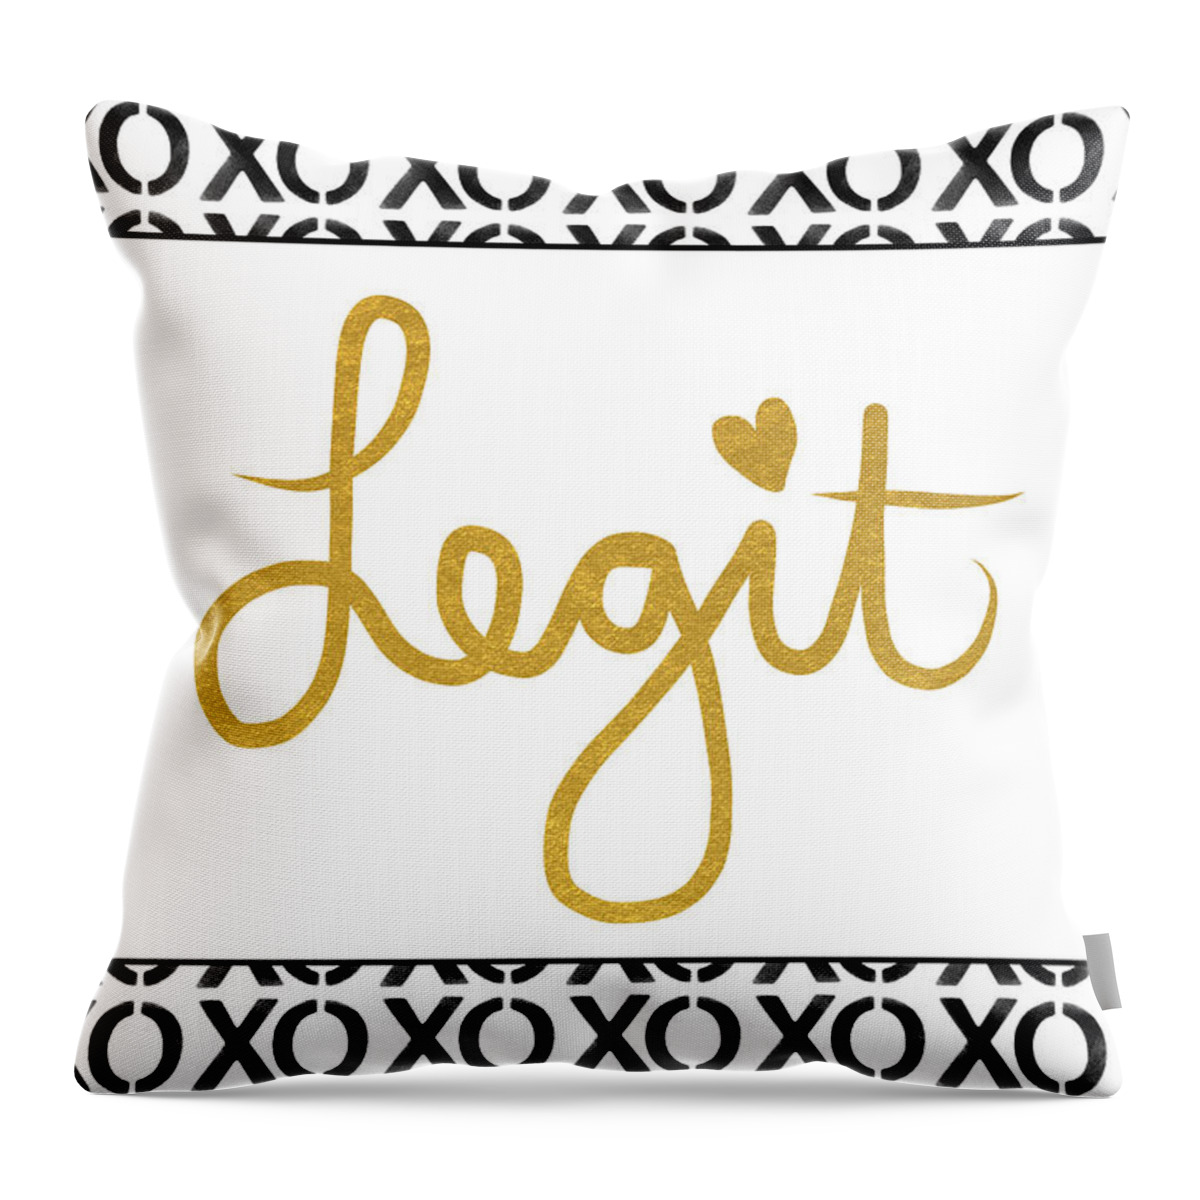 Legit Throw Pillow featuring the painting Legit Love by Linda Woods